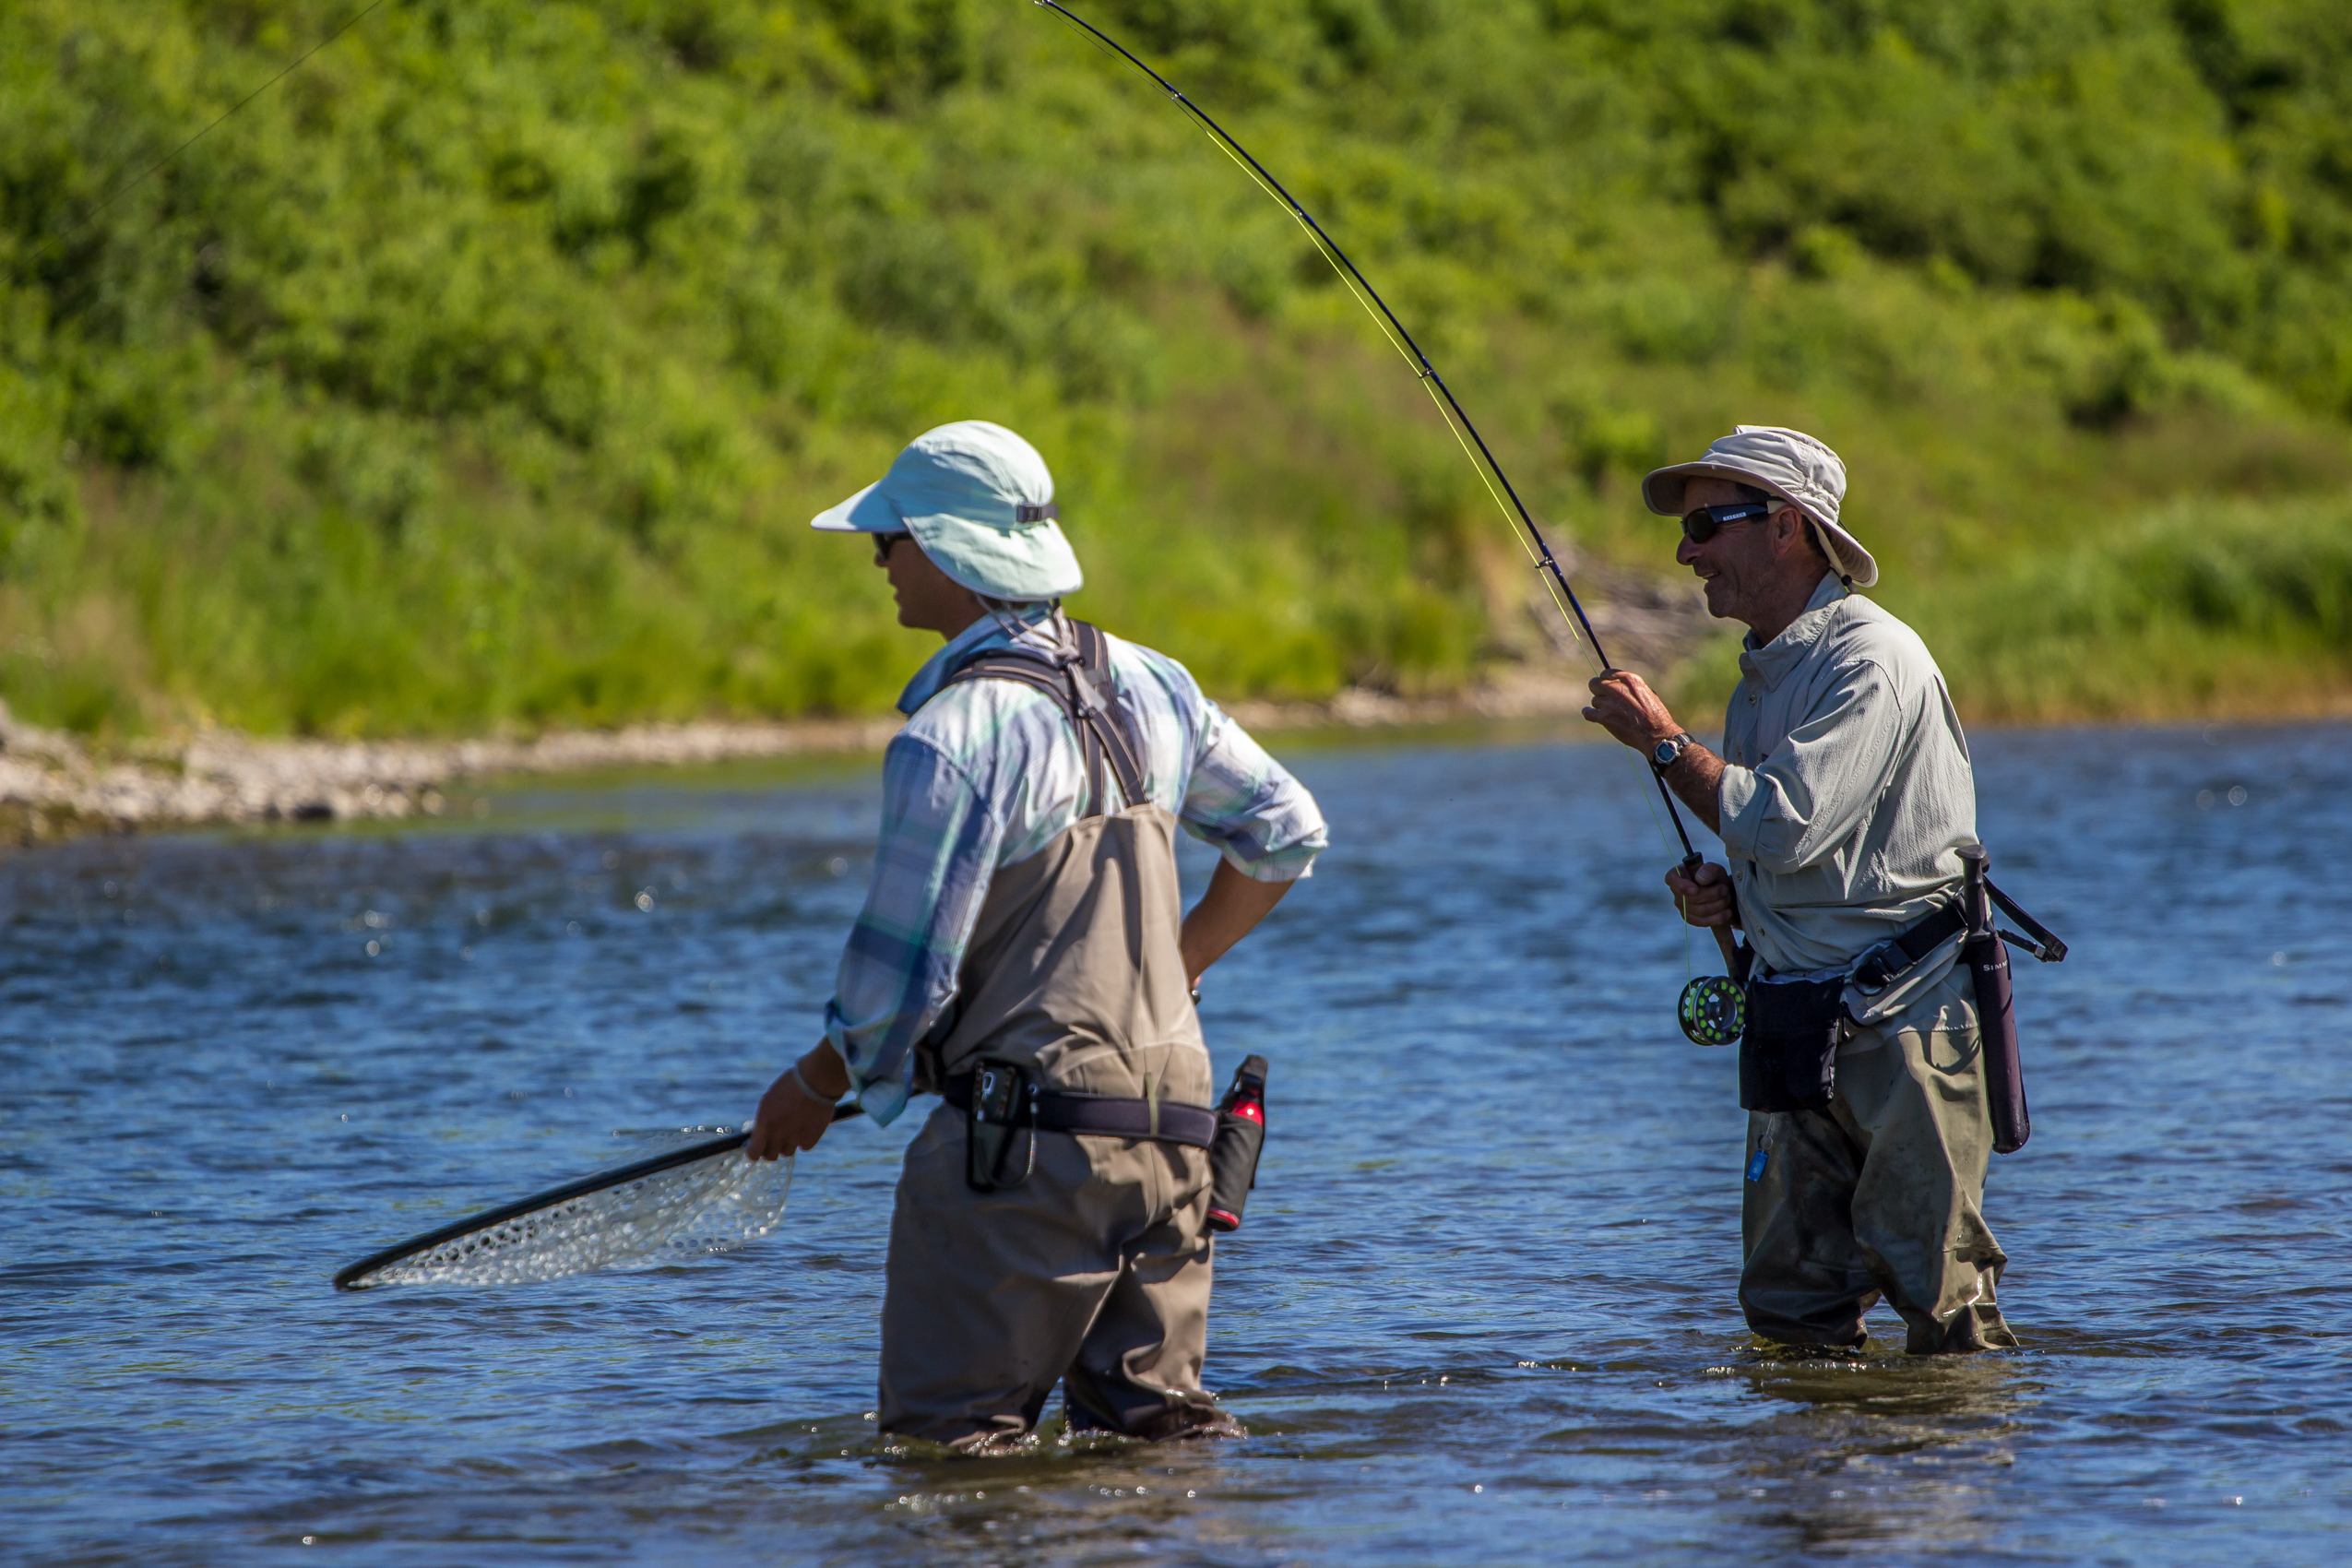 patagonia fly fishing wadersGear Archives Wild River Fish - www